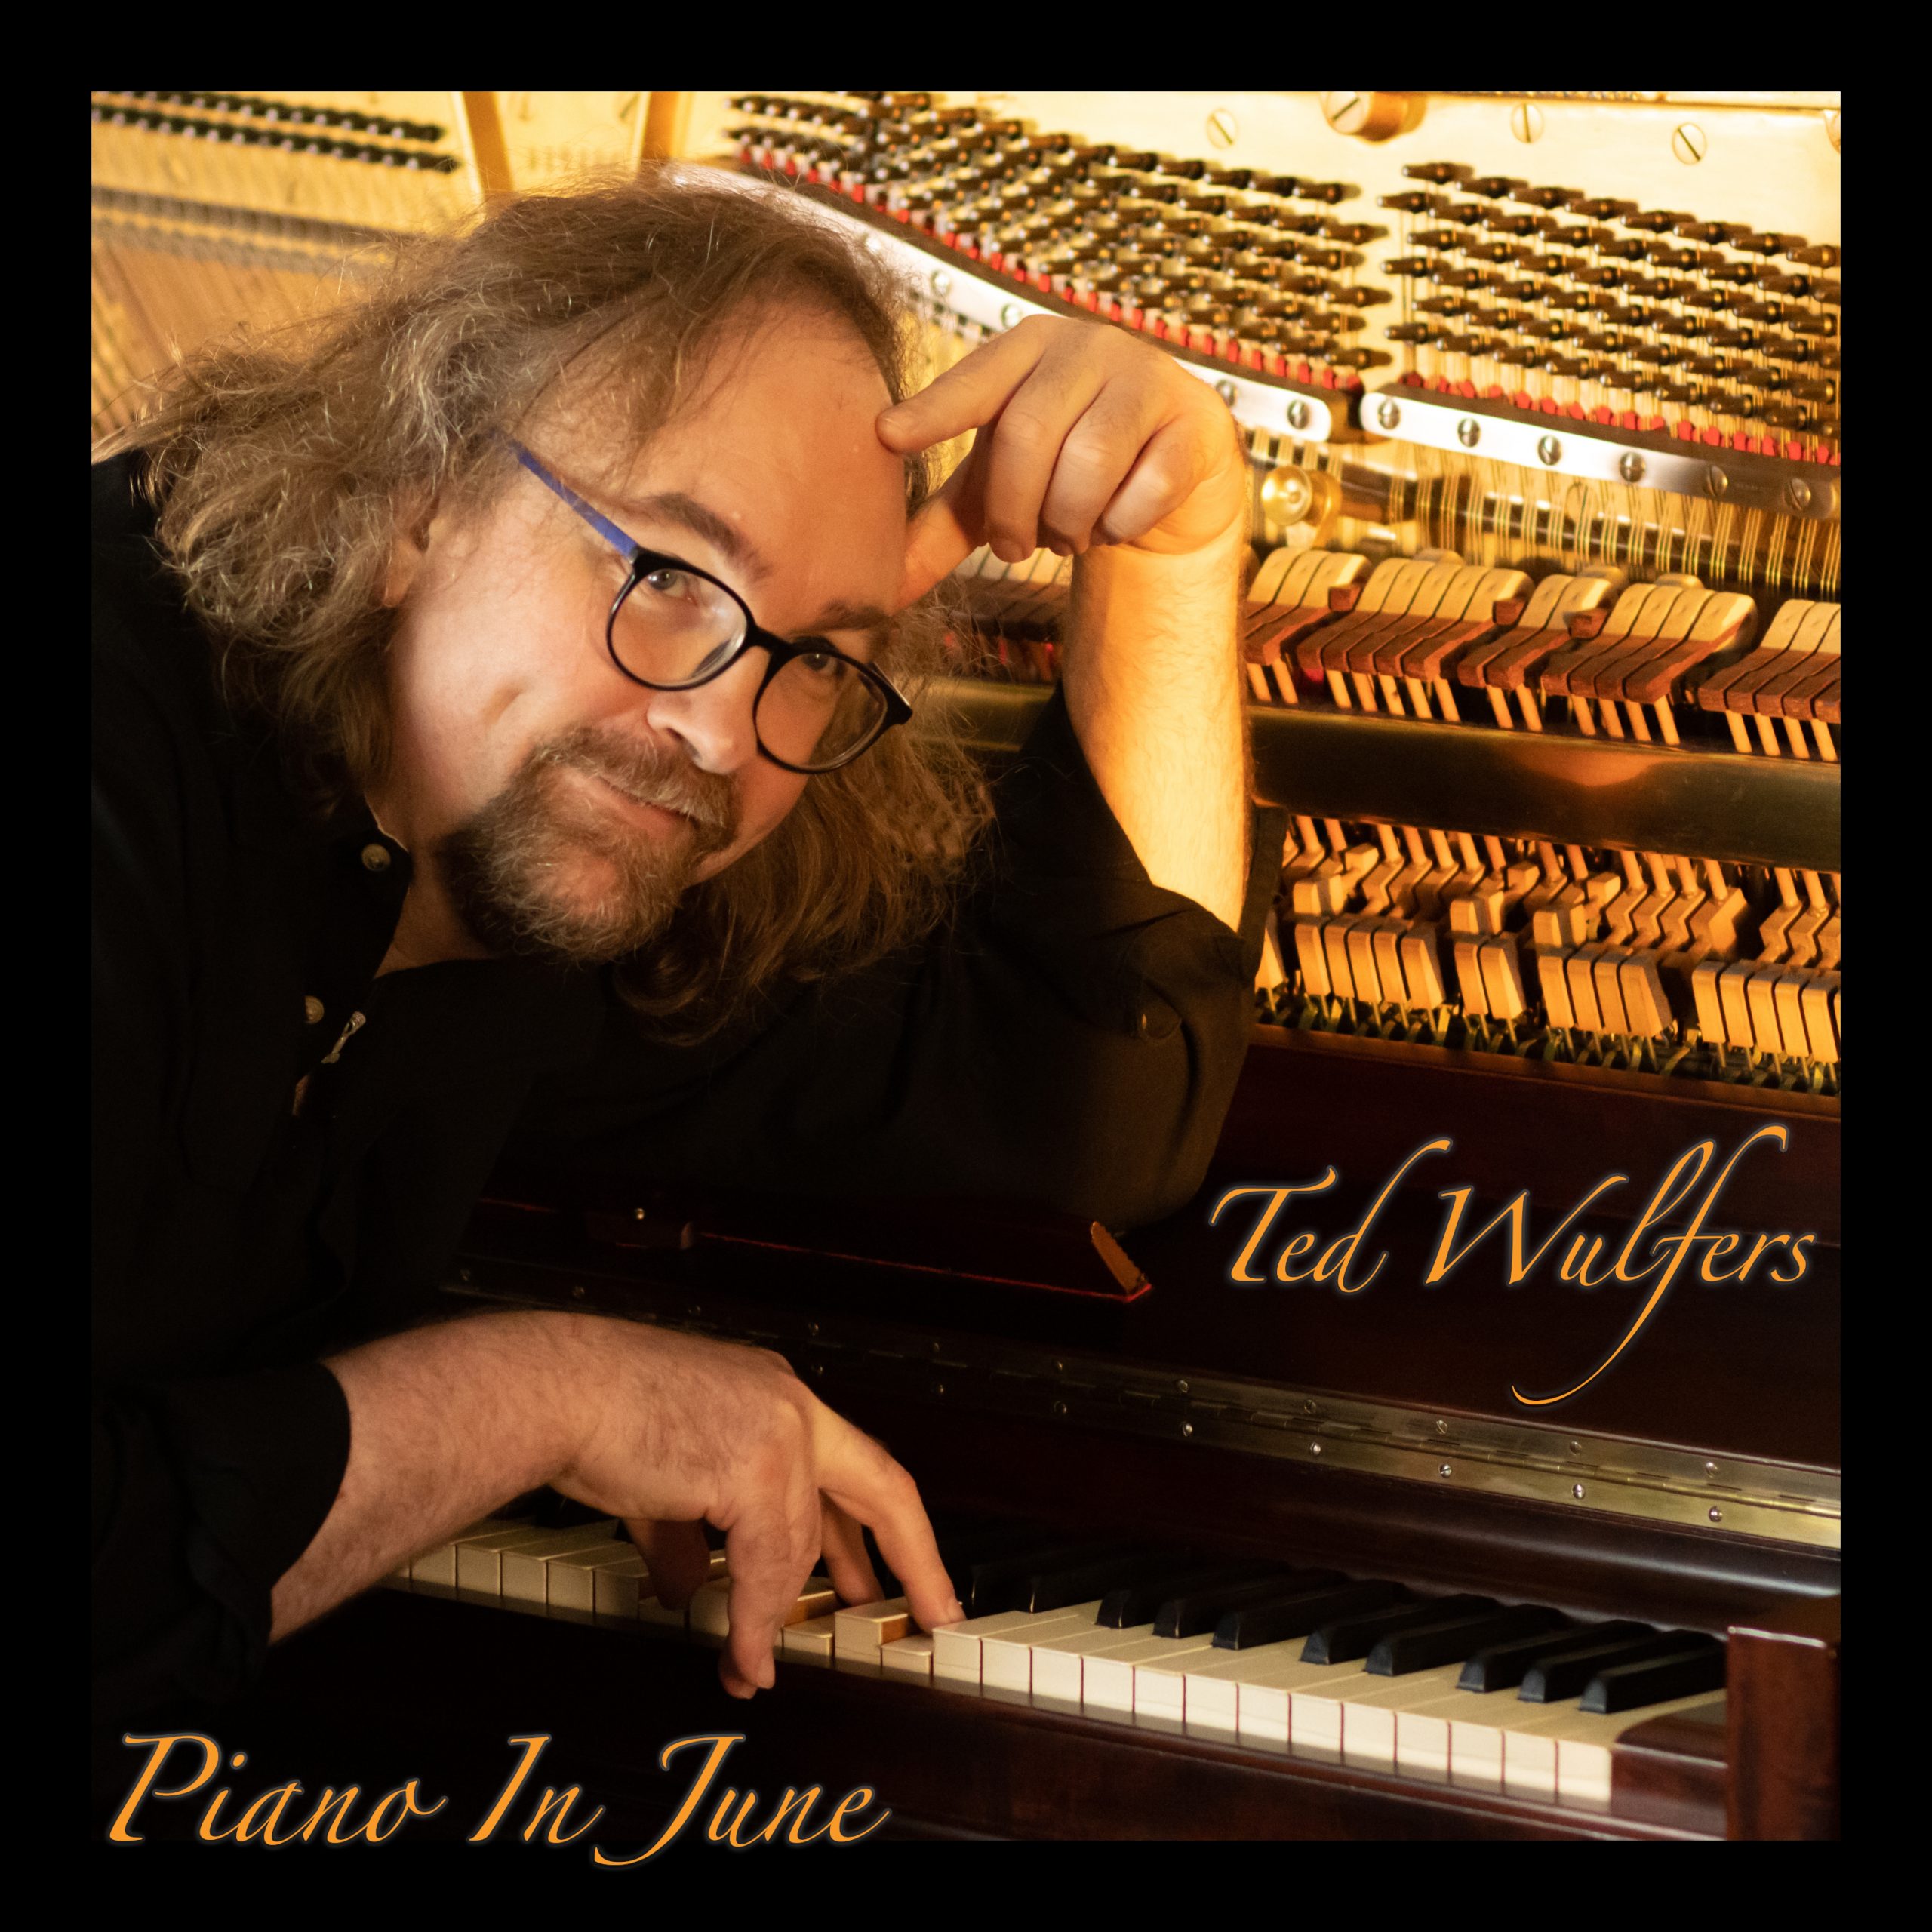 Ted’s 12th album Piano In June Out Today!